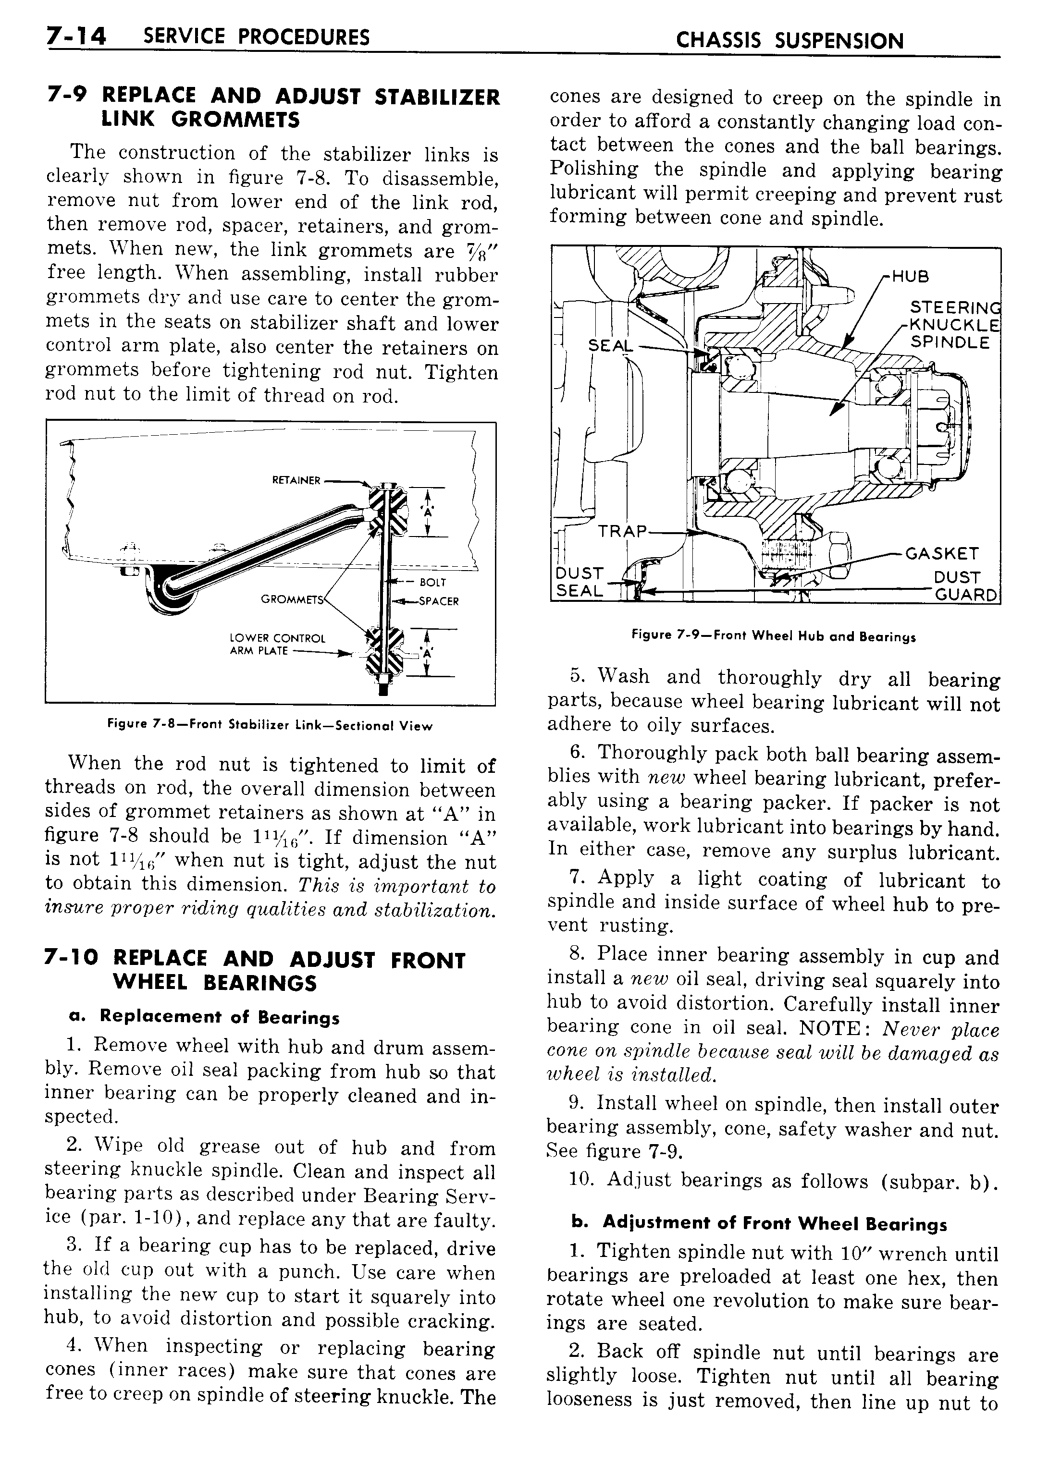 n_08 1957 Buick Shop Manual - Chassis Suspension-014-014.jpg